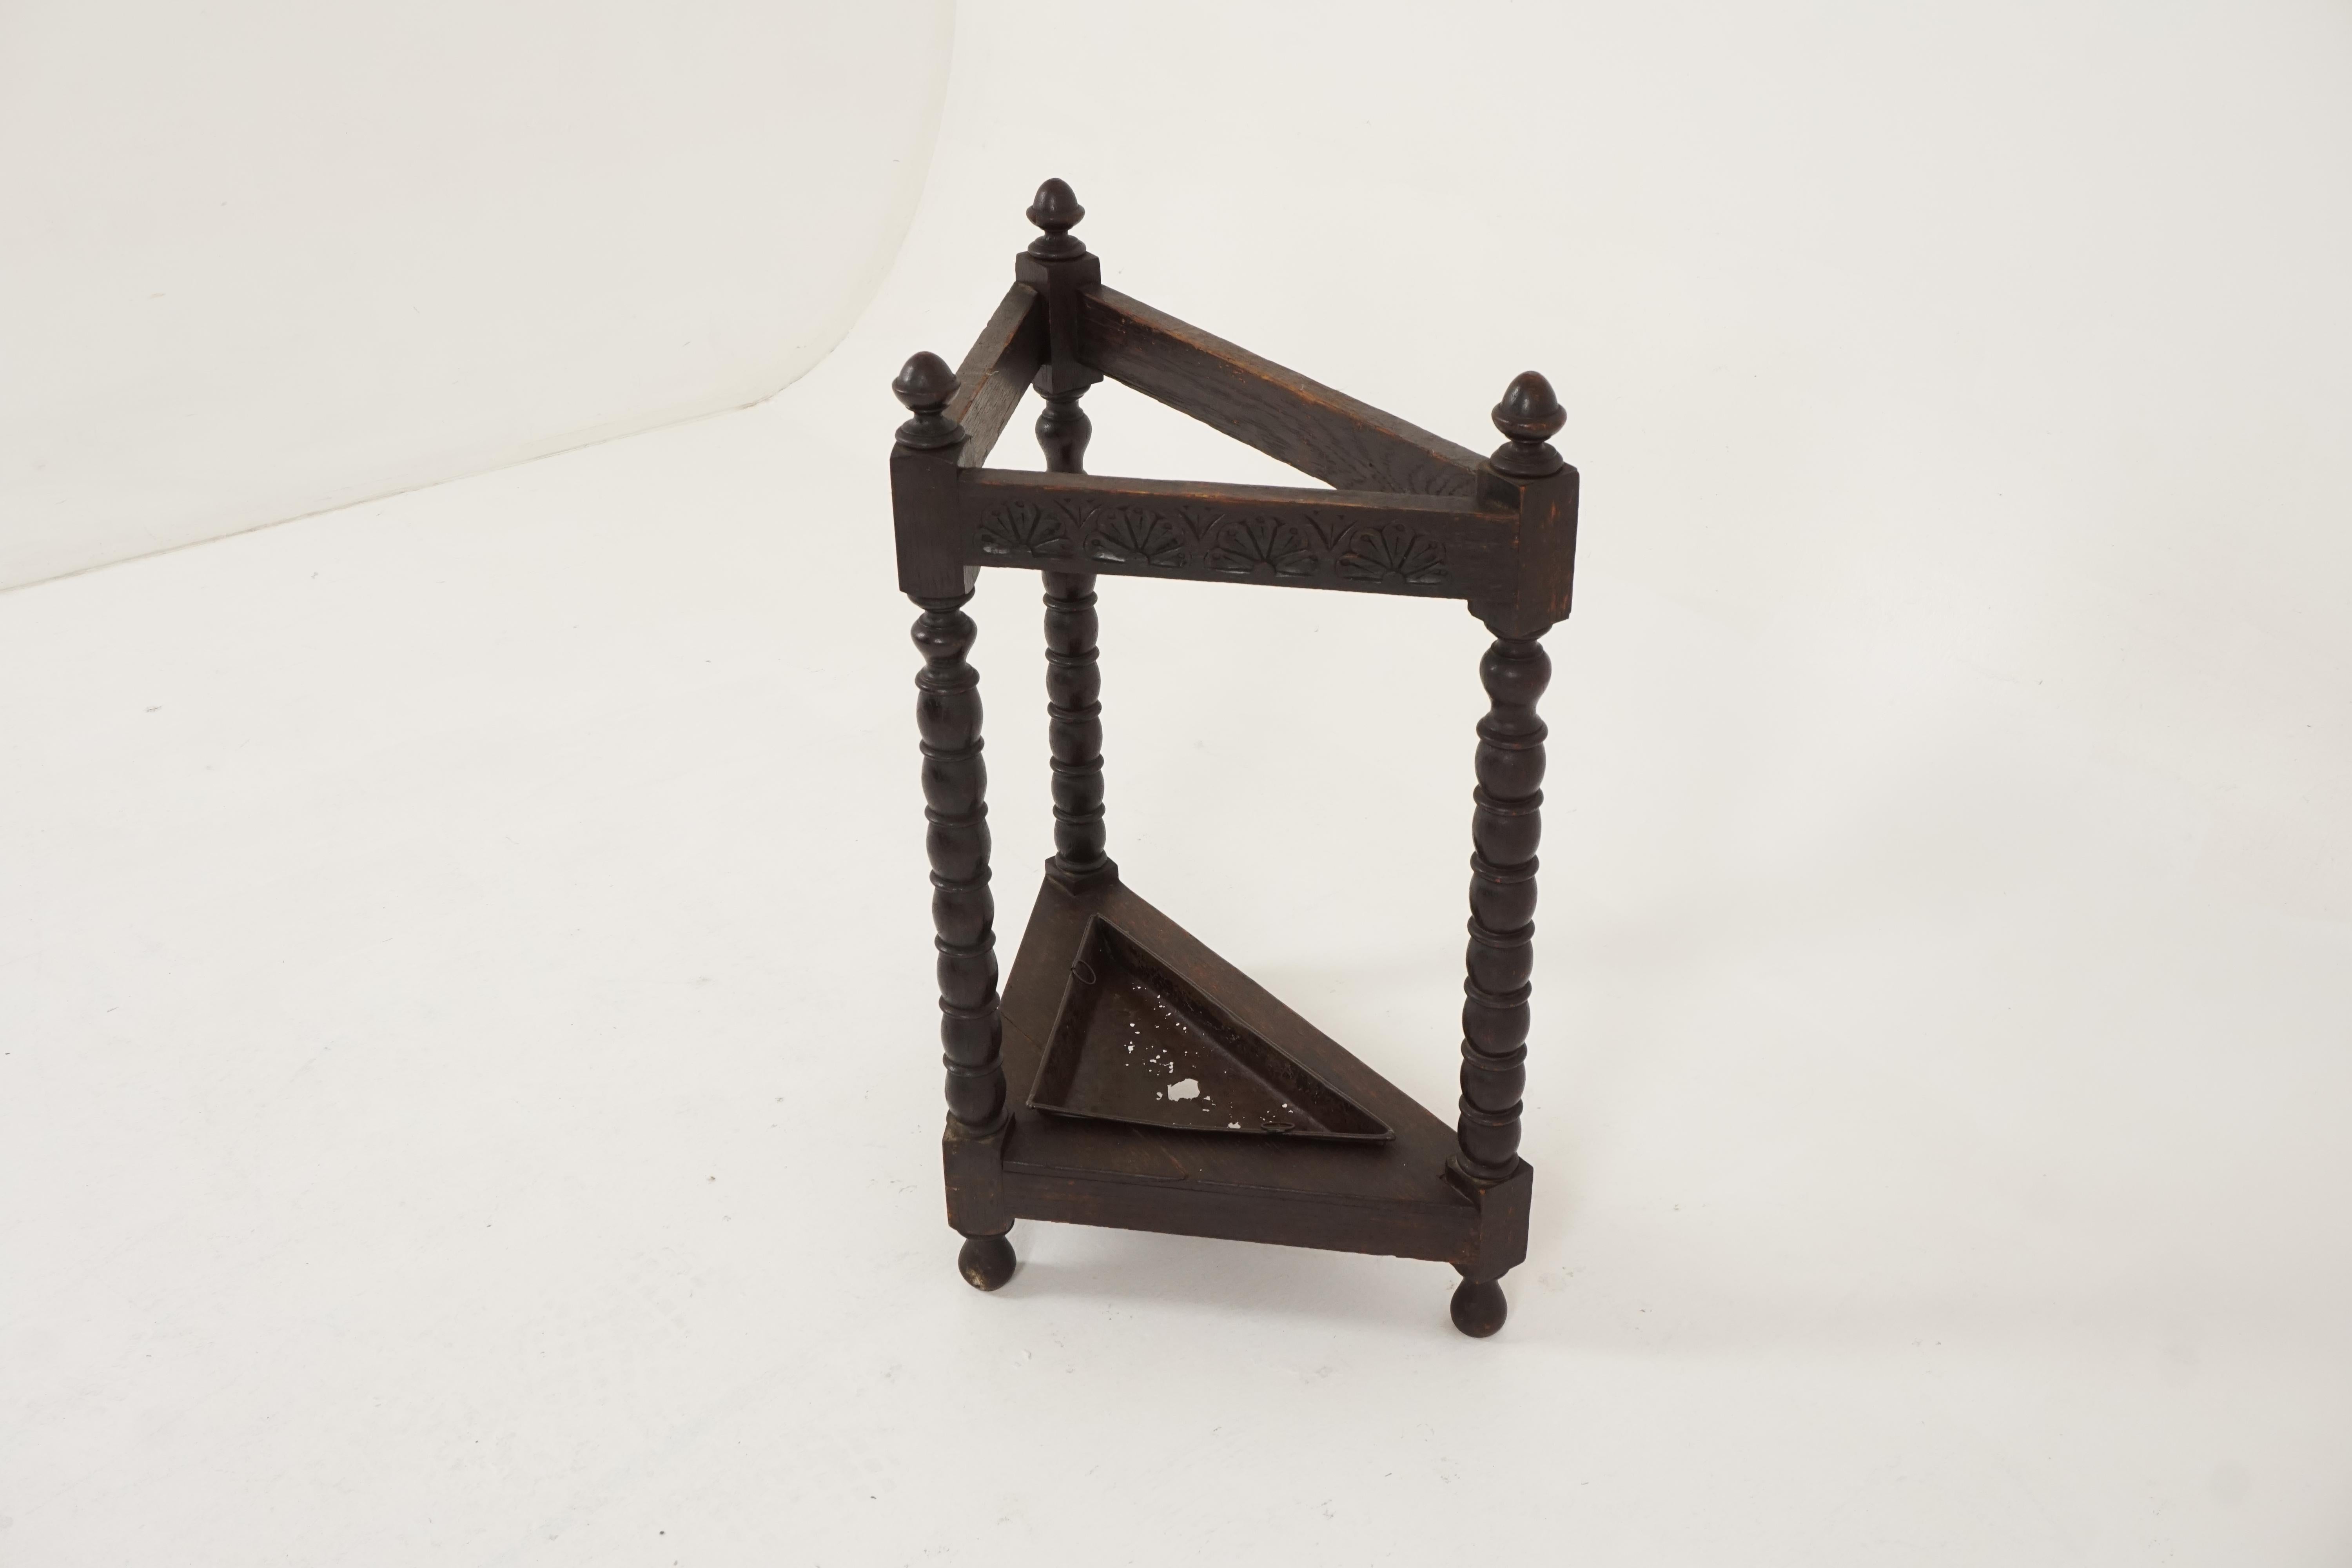 Antique oak stick stand, carved oak triangular stick stand and tray, Scotland 1890, B2242

Scotland, 1890
Solid oak
Original finish
Finials to the top
Carved rail on all three sides
Standing on three turned bobbin legs
With original metal